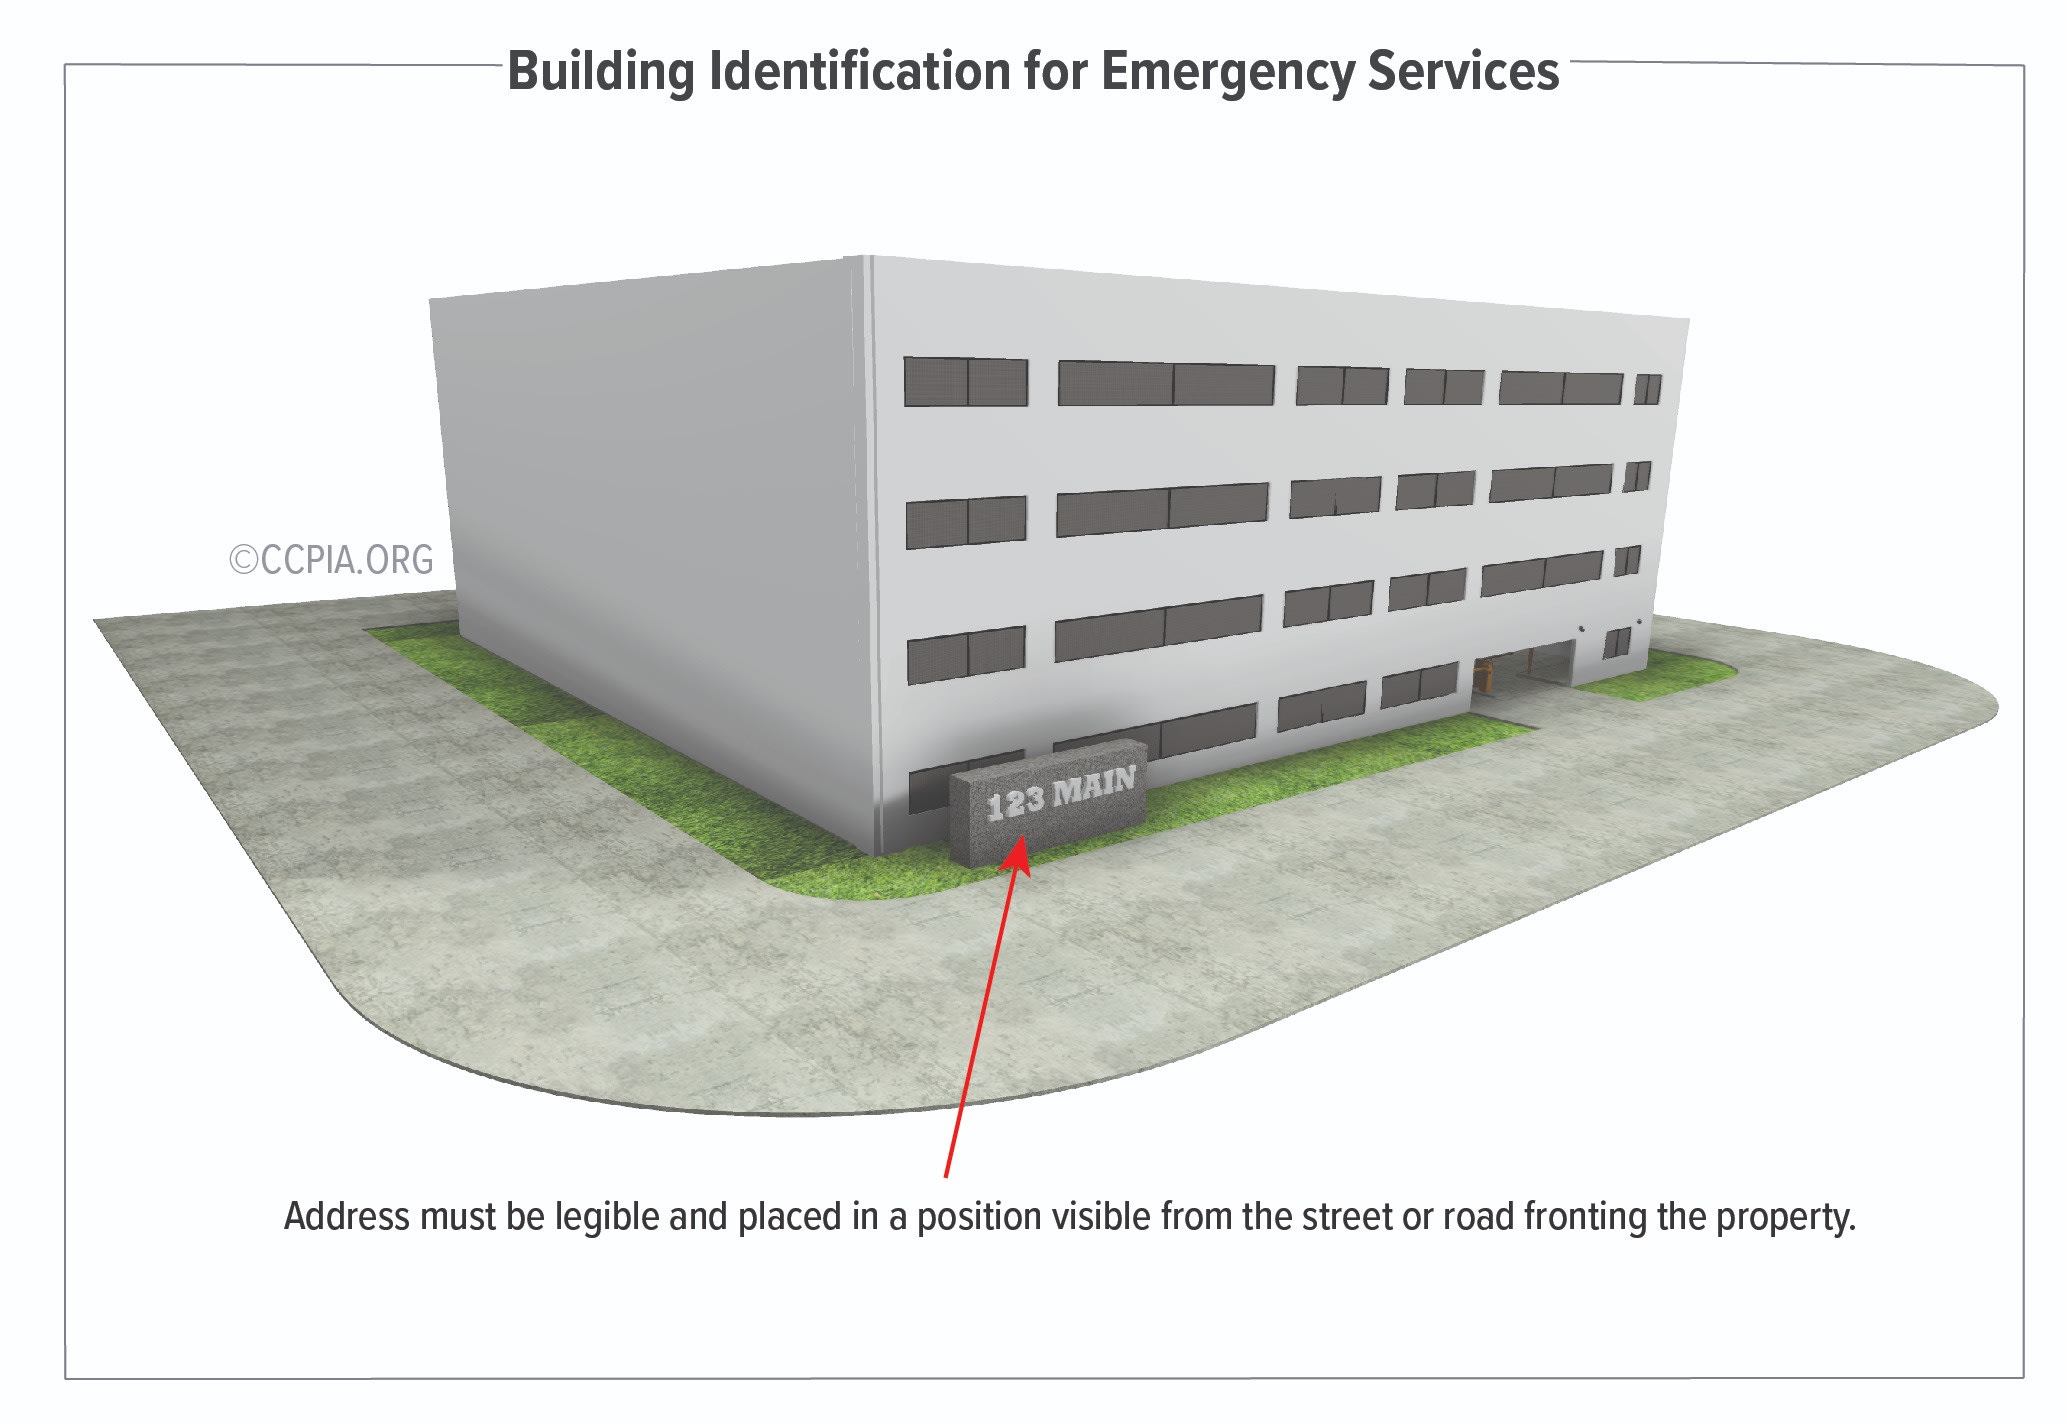 A building's address must be visible from the street or road fronting the property for emergency services.